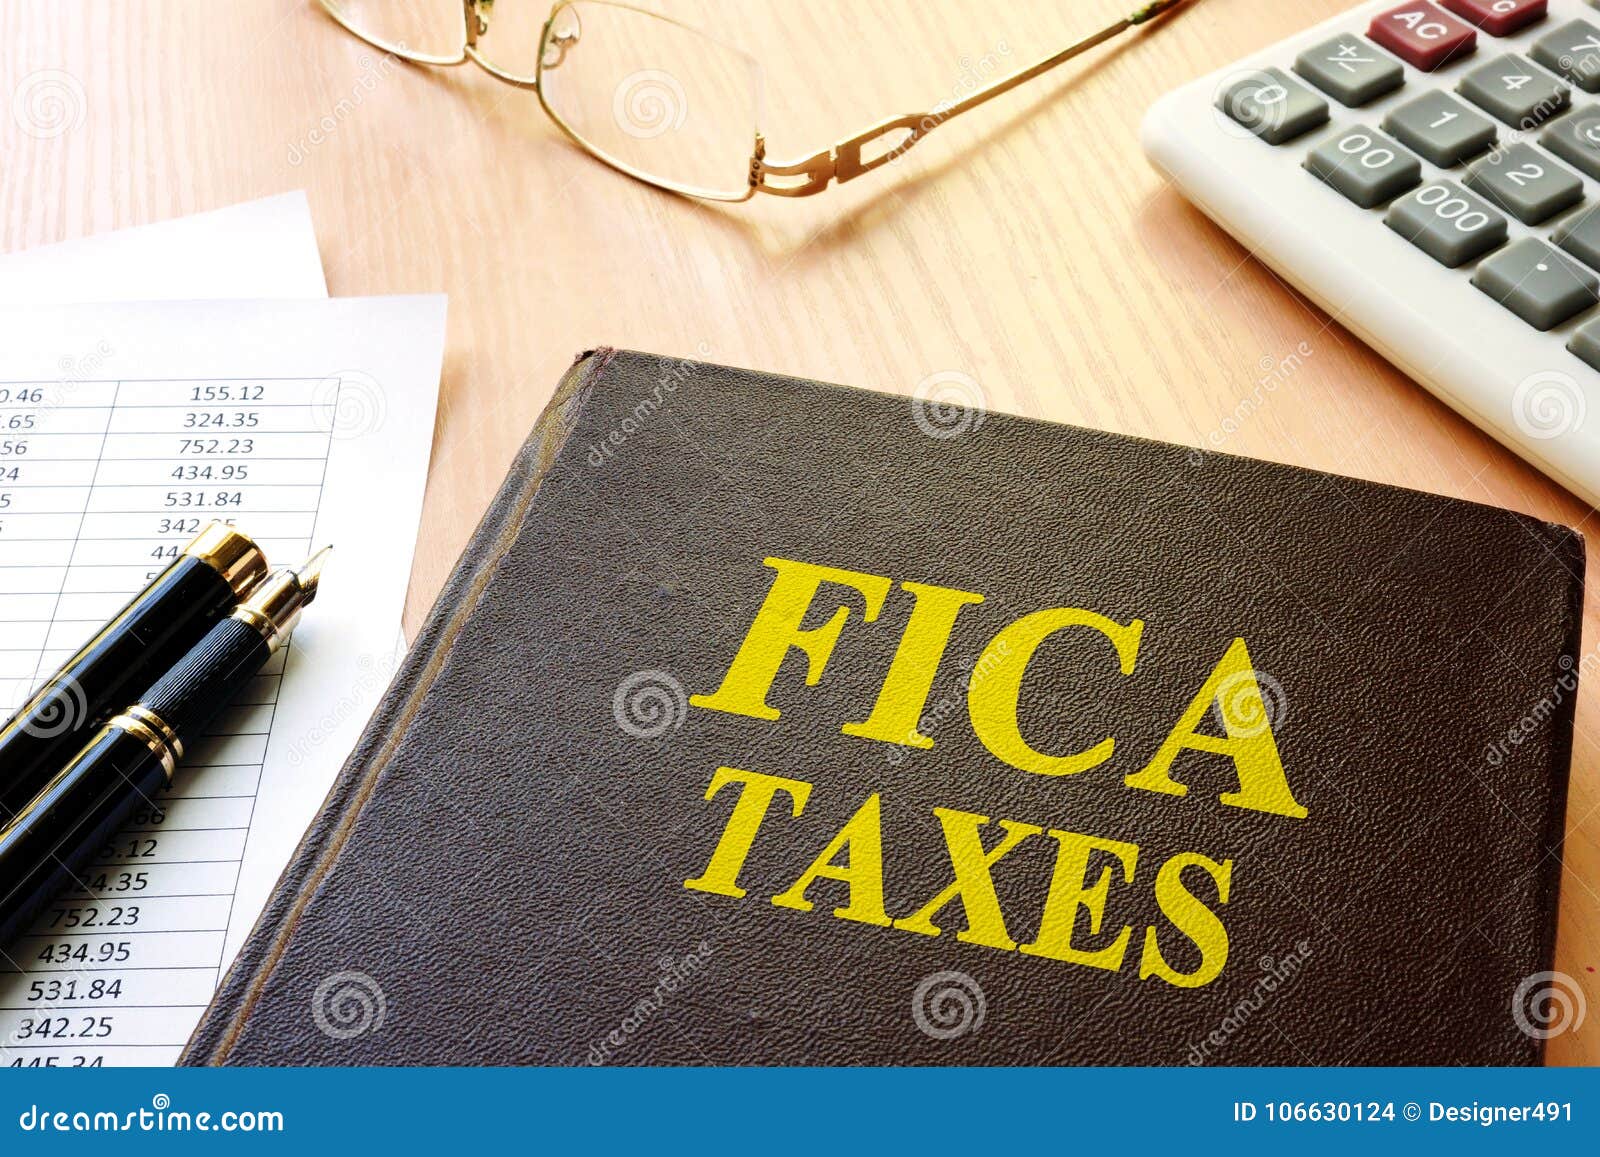 fica taxes and calculator on a table.